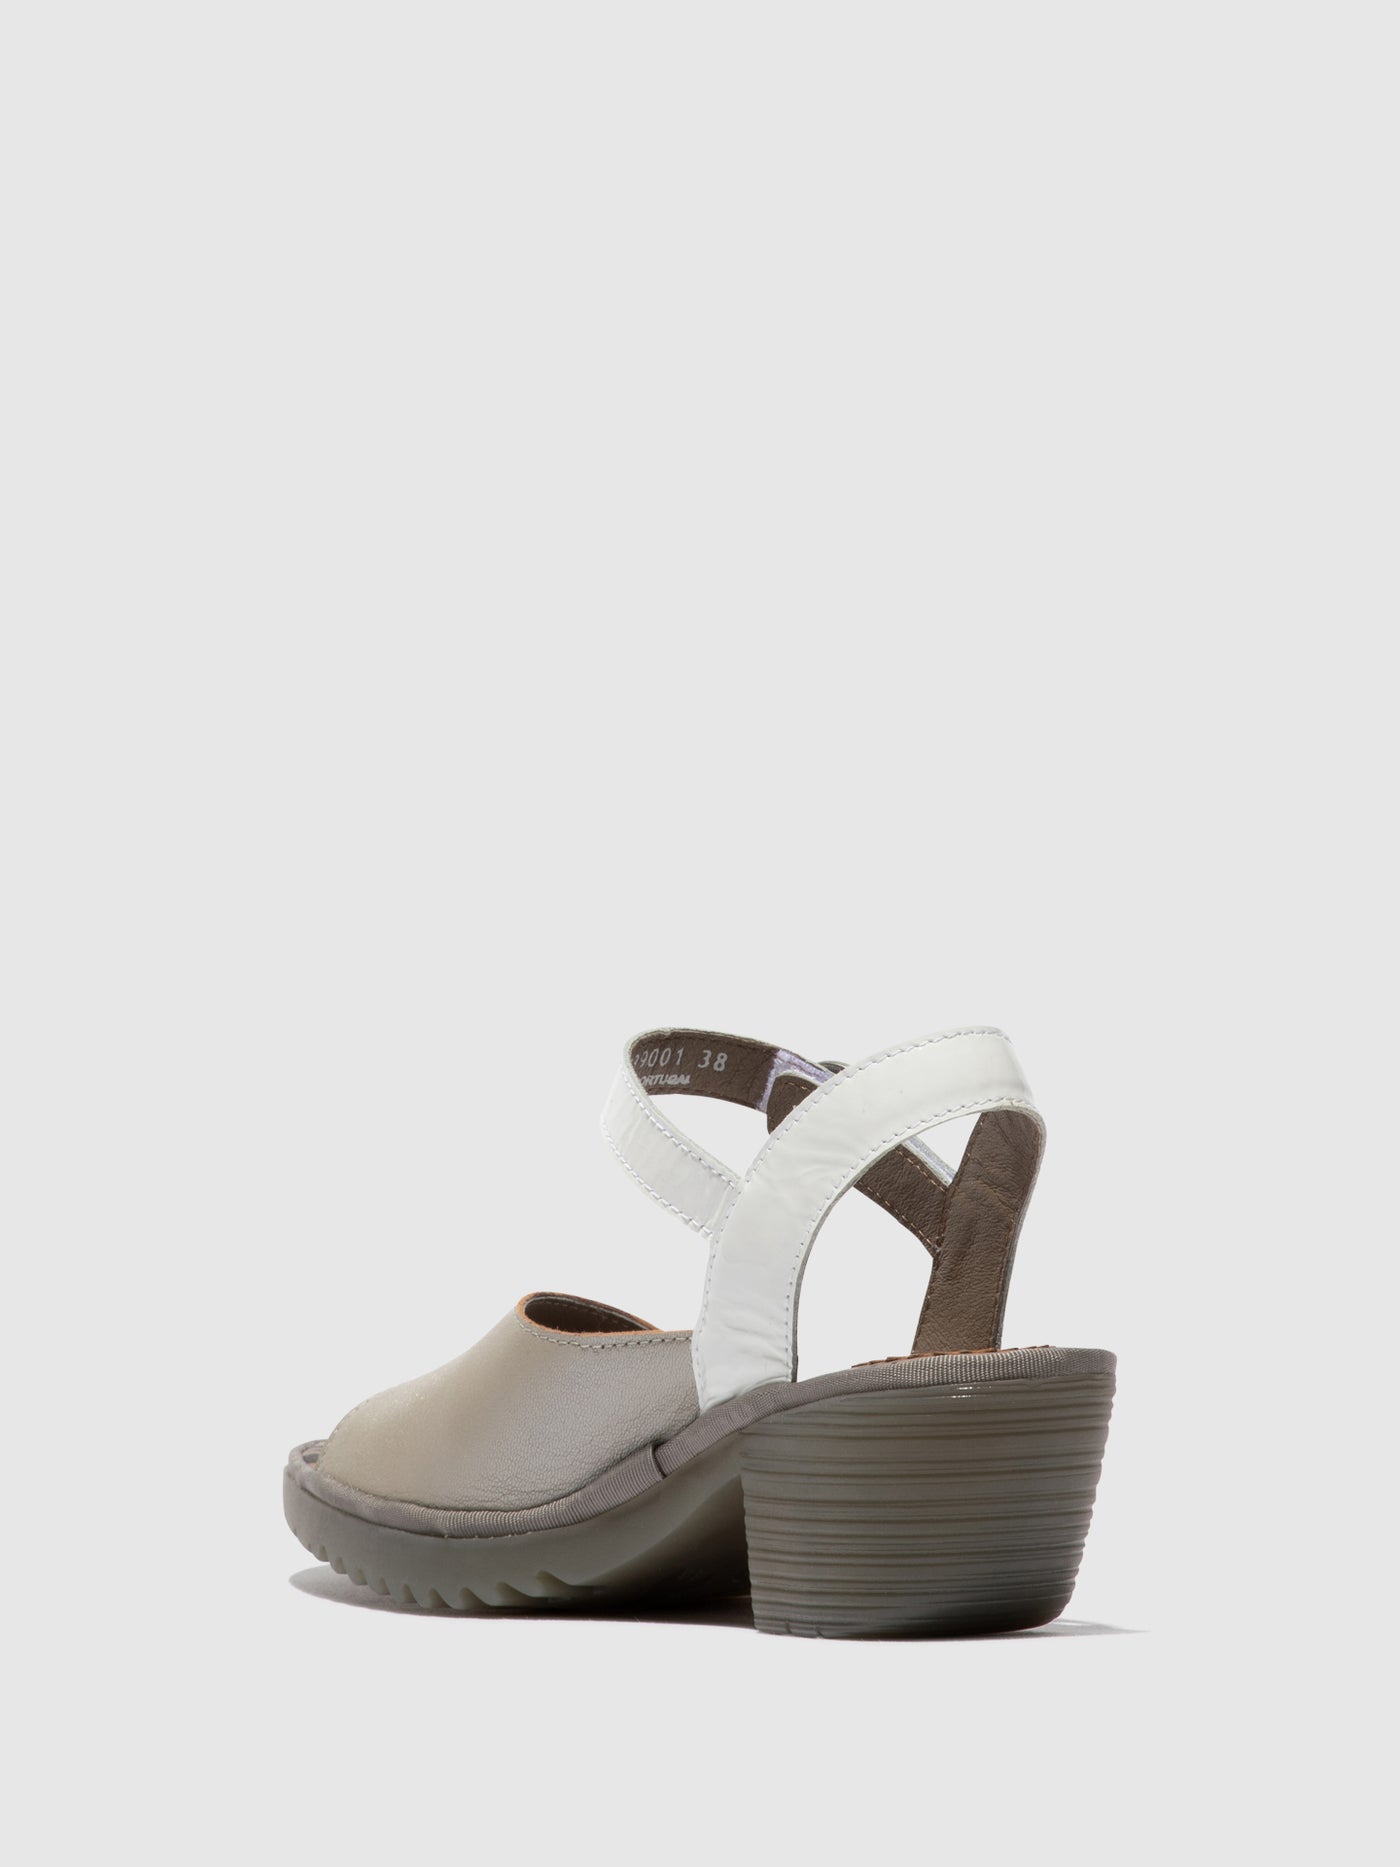 Sling-Back Sandals WELY439FLY SILVER/ OFFWHITE